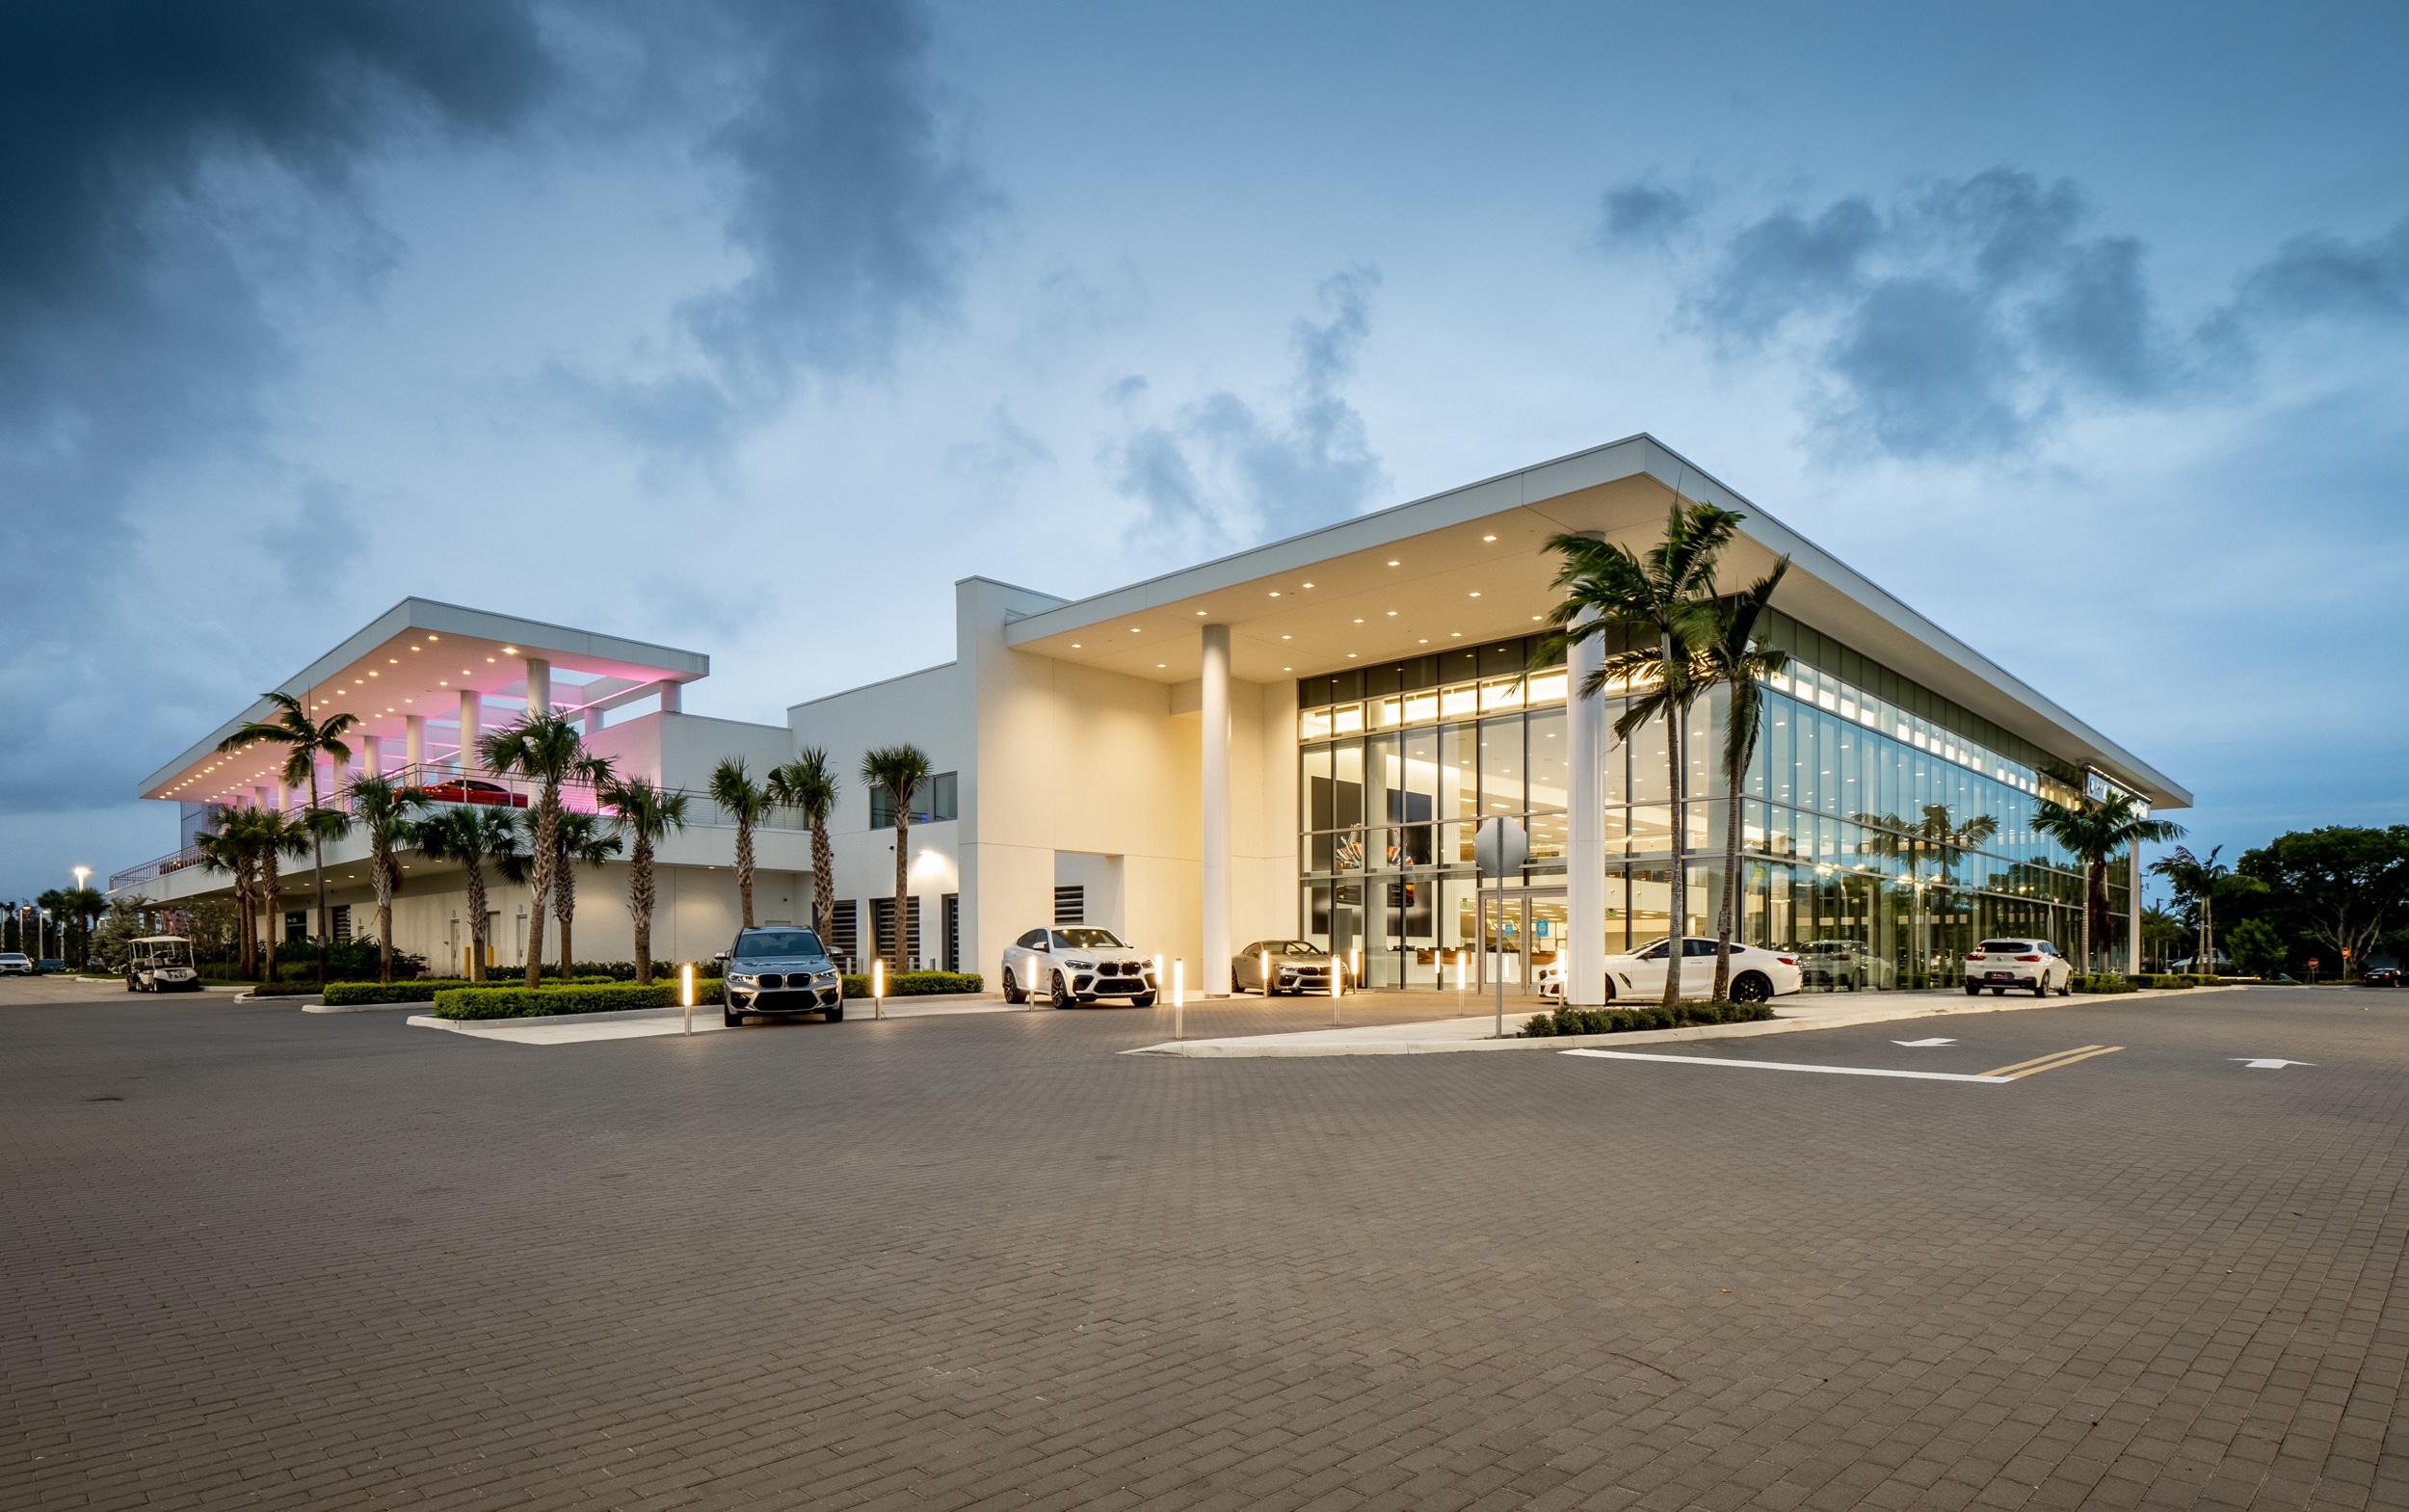 Exterior view of BMW of Delray Beach in the evening